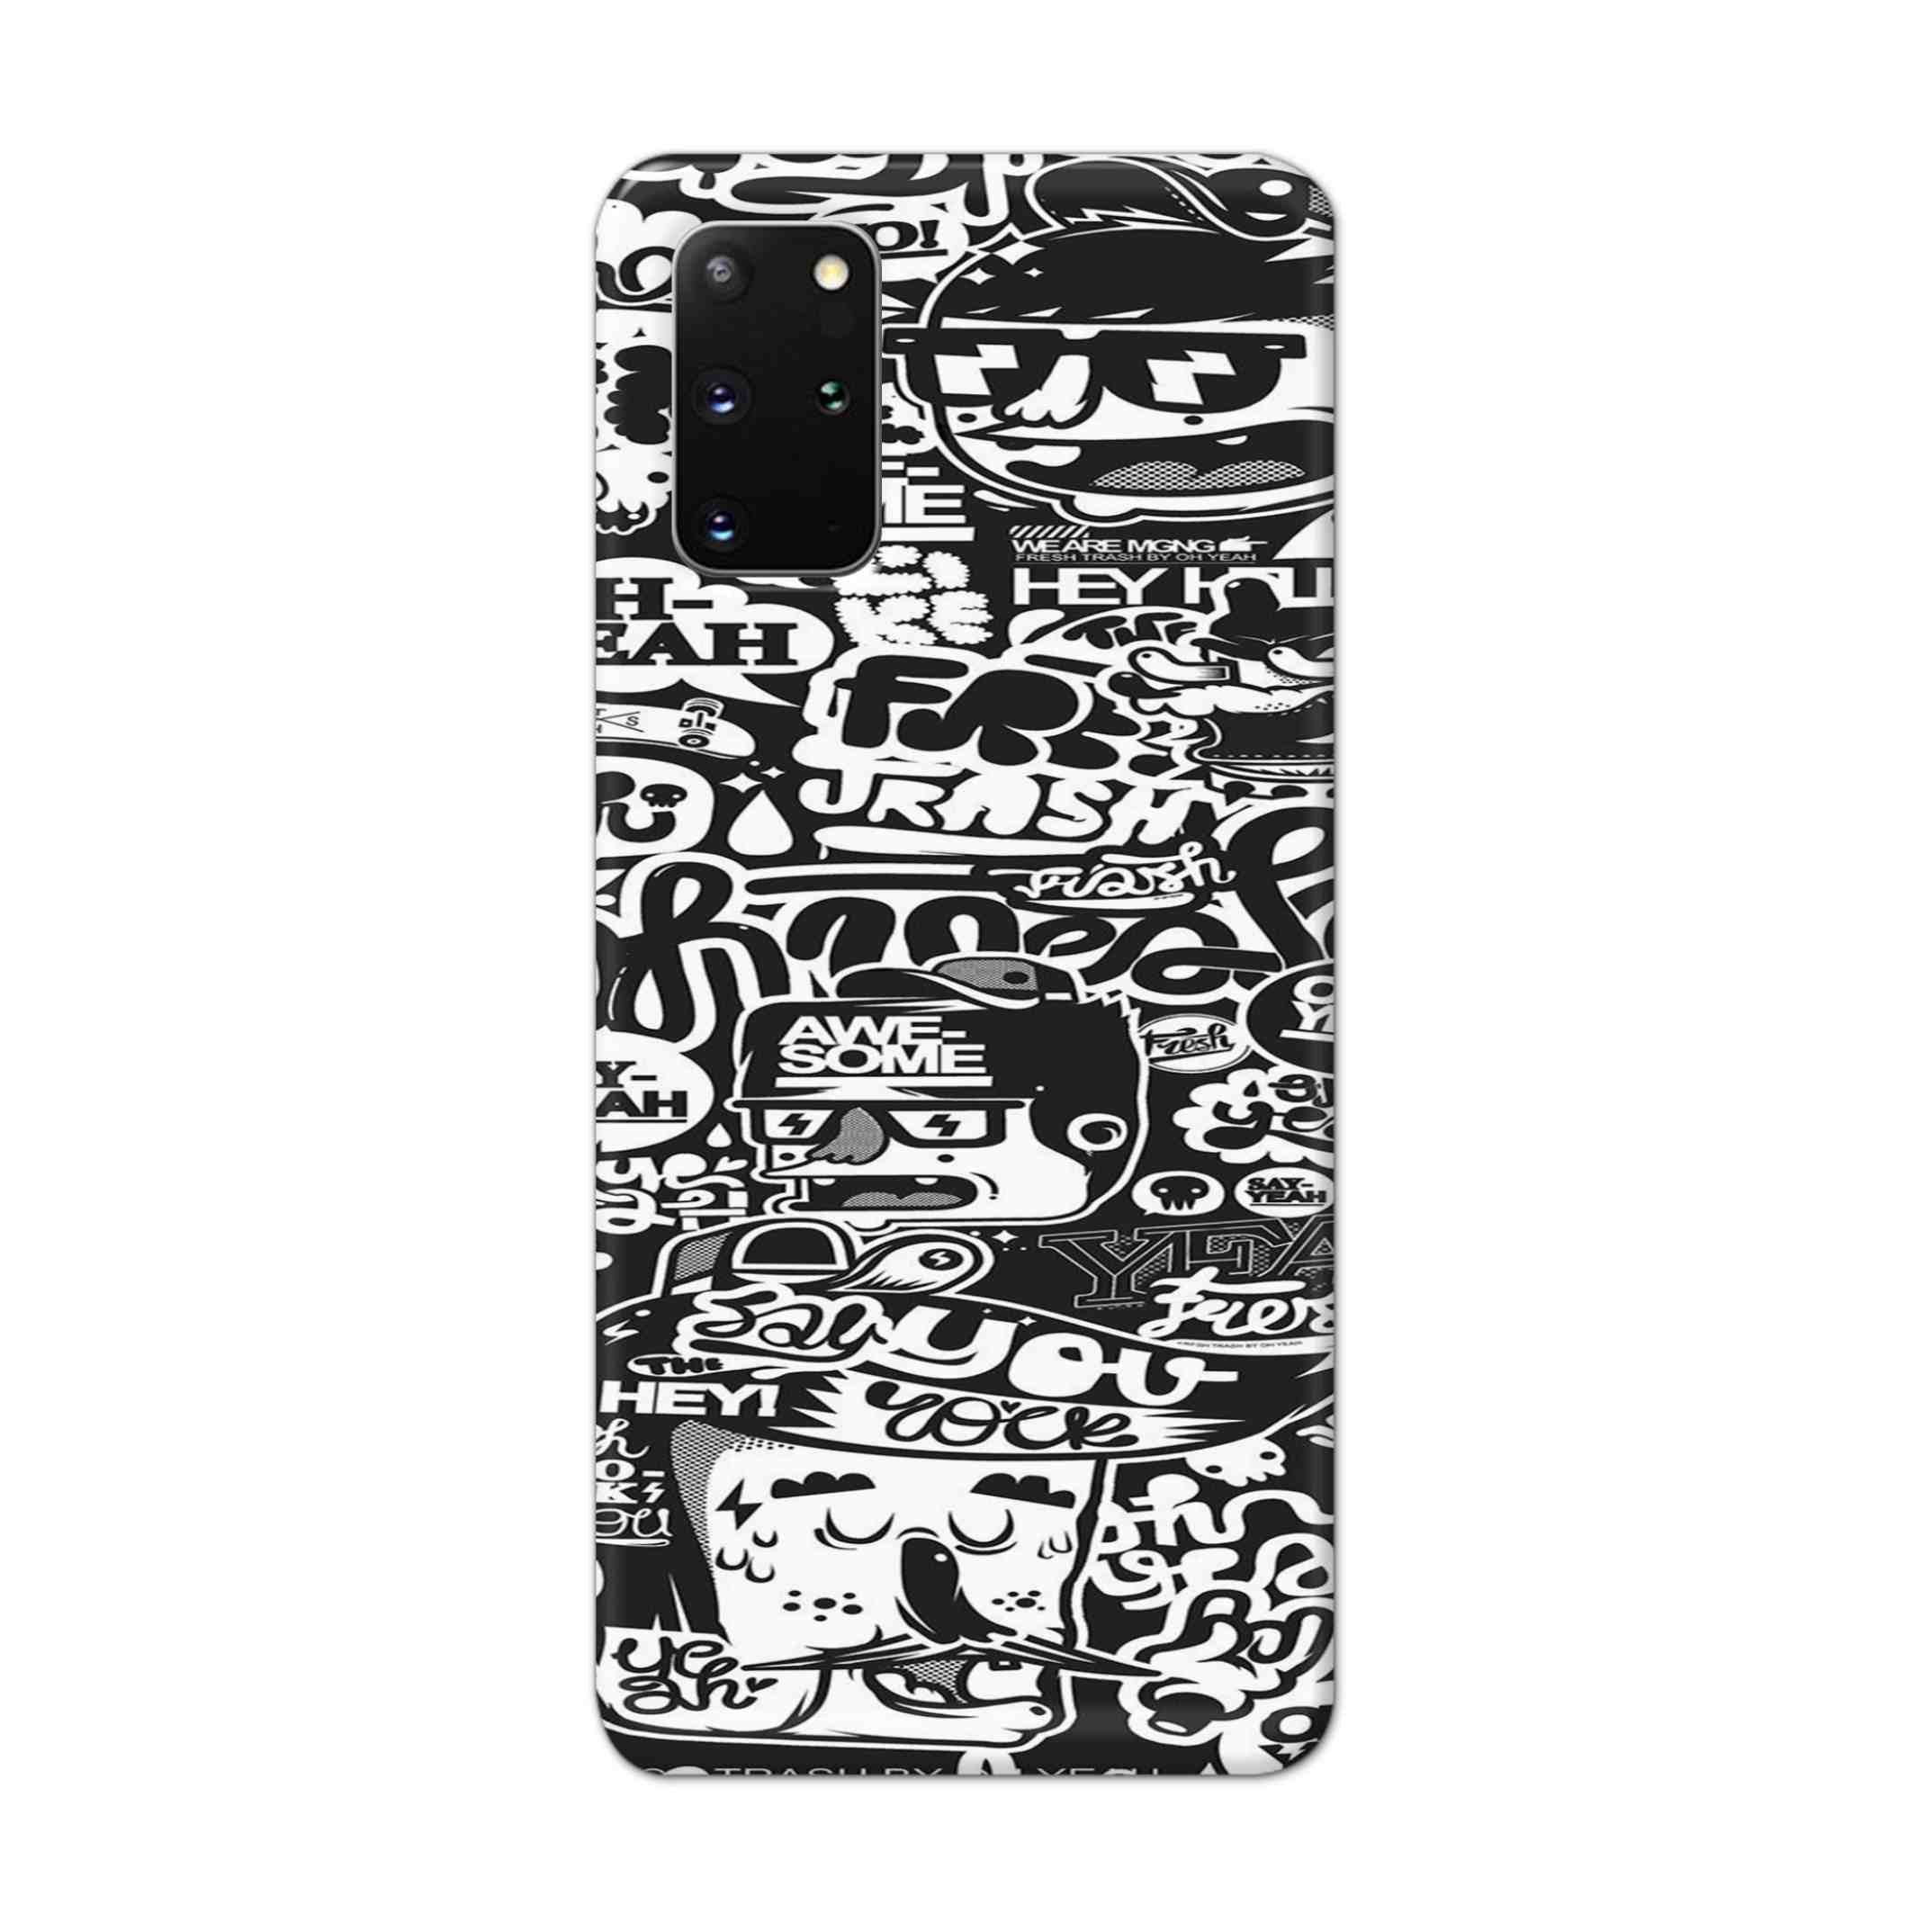 Buy Awesome Hard Back Mobile Phone Case Cover For Samsung Galaxy S20 Plus Online